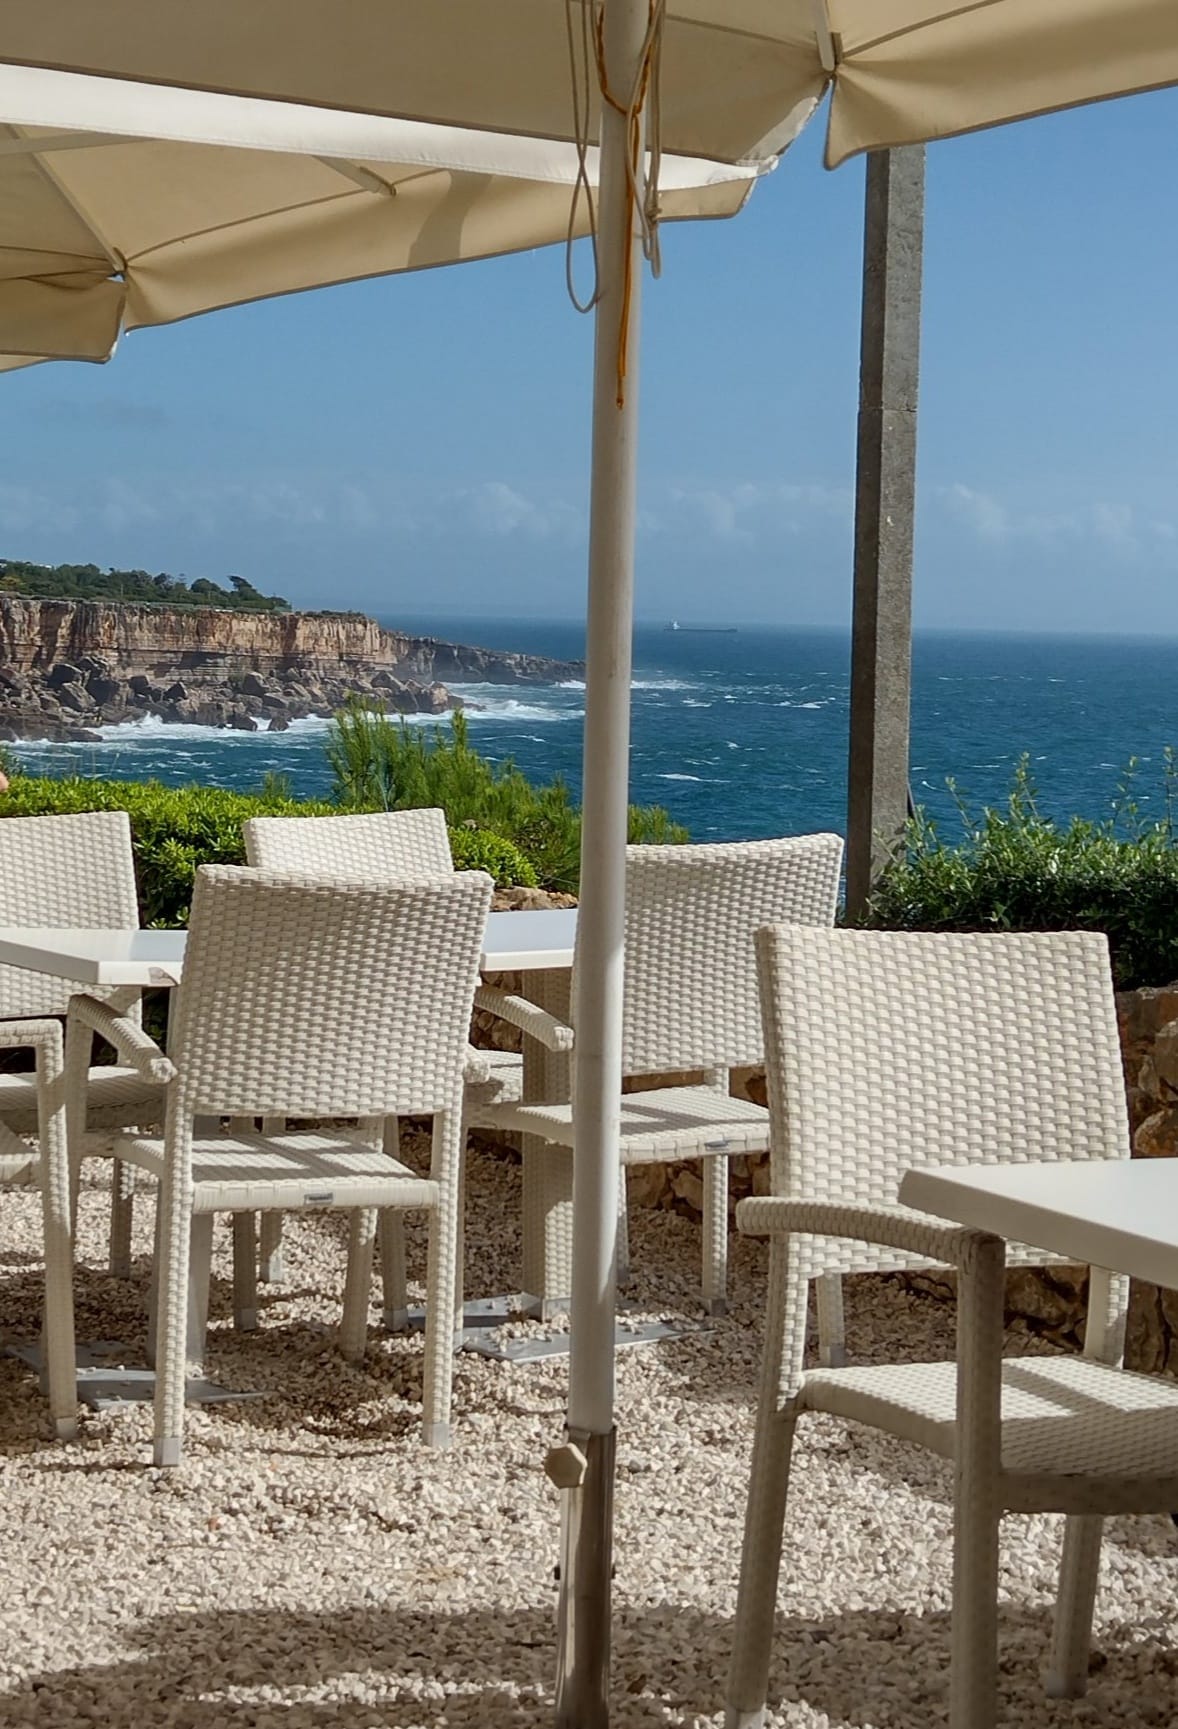 Tables and chairs by the ocean